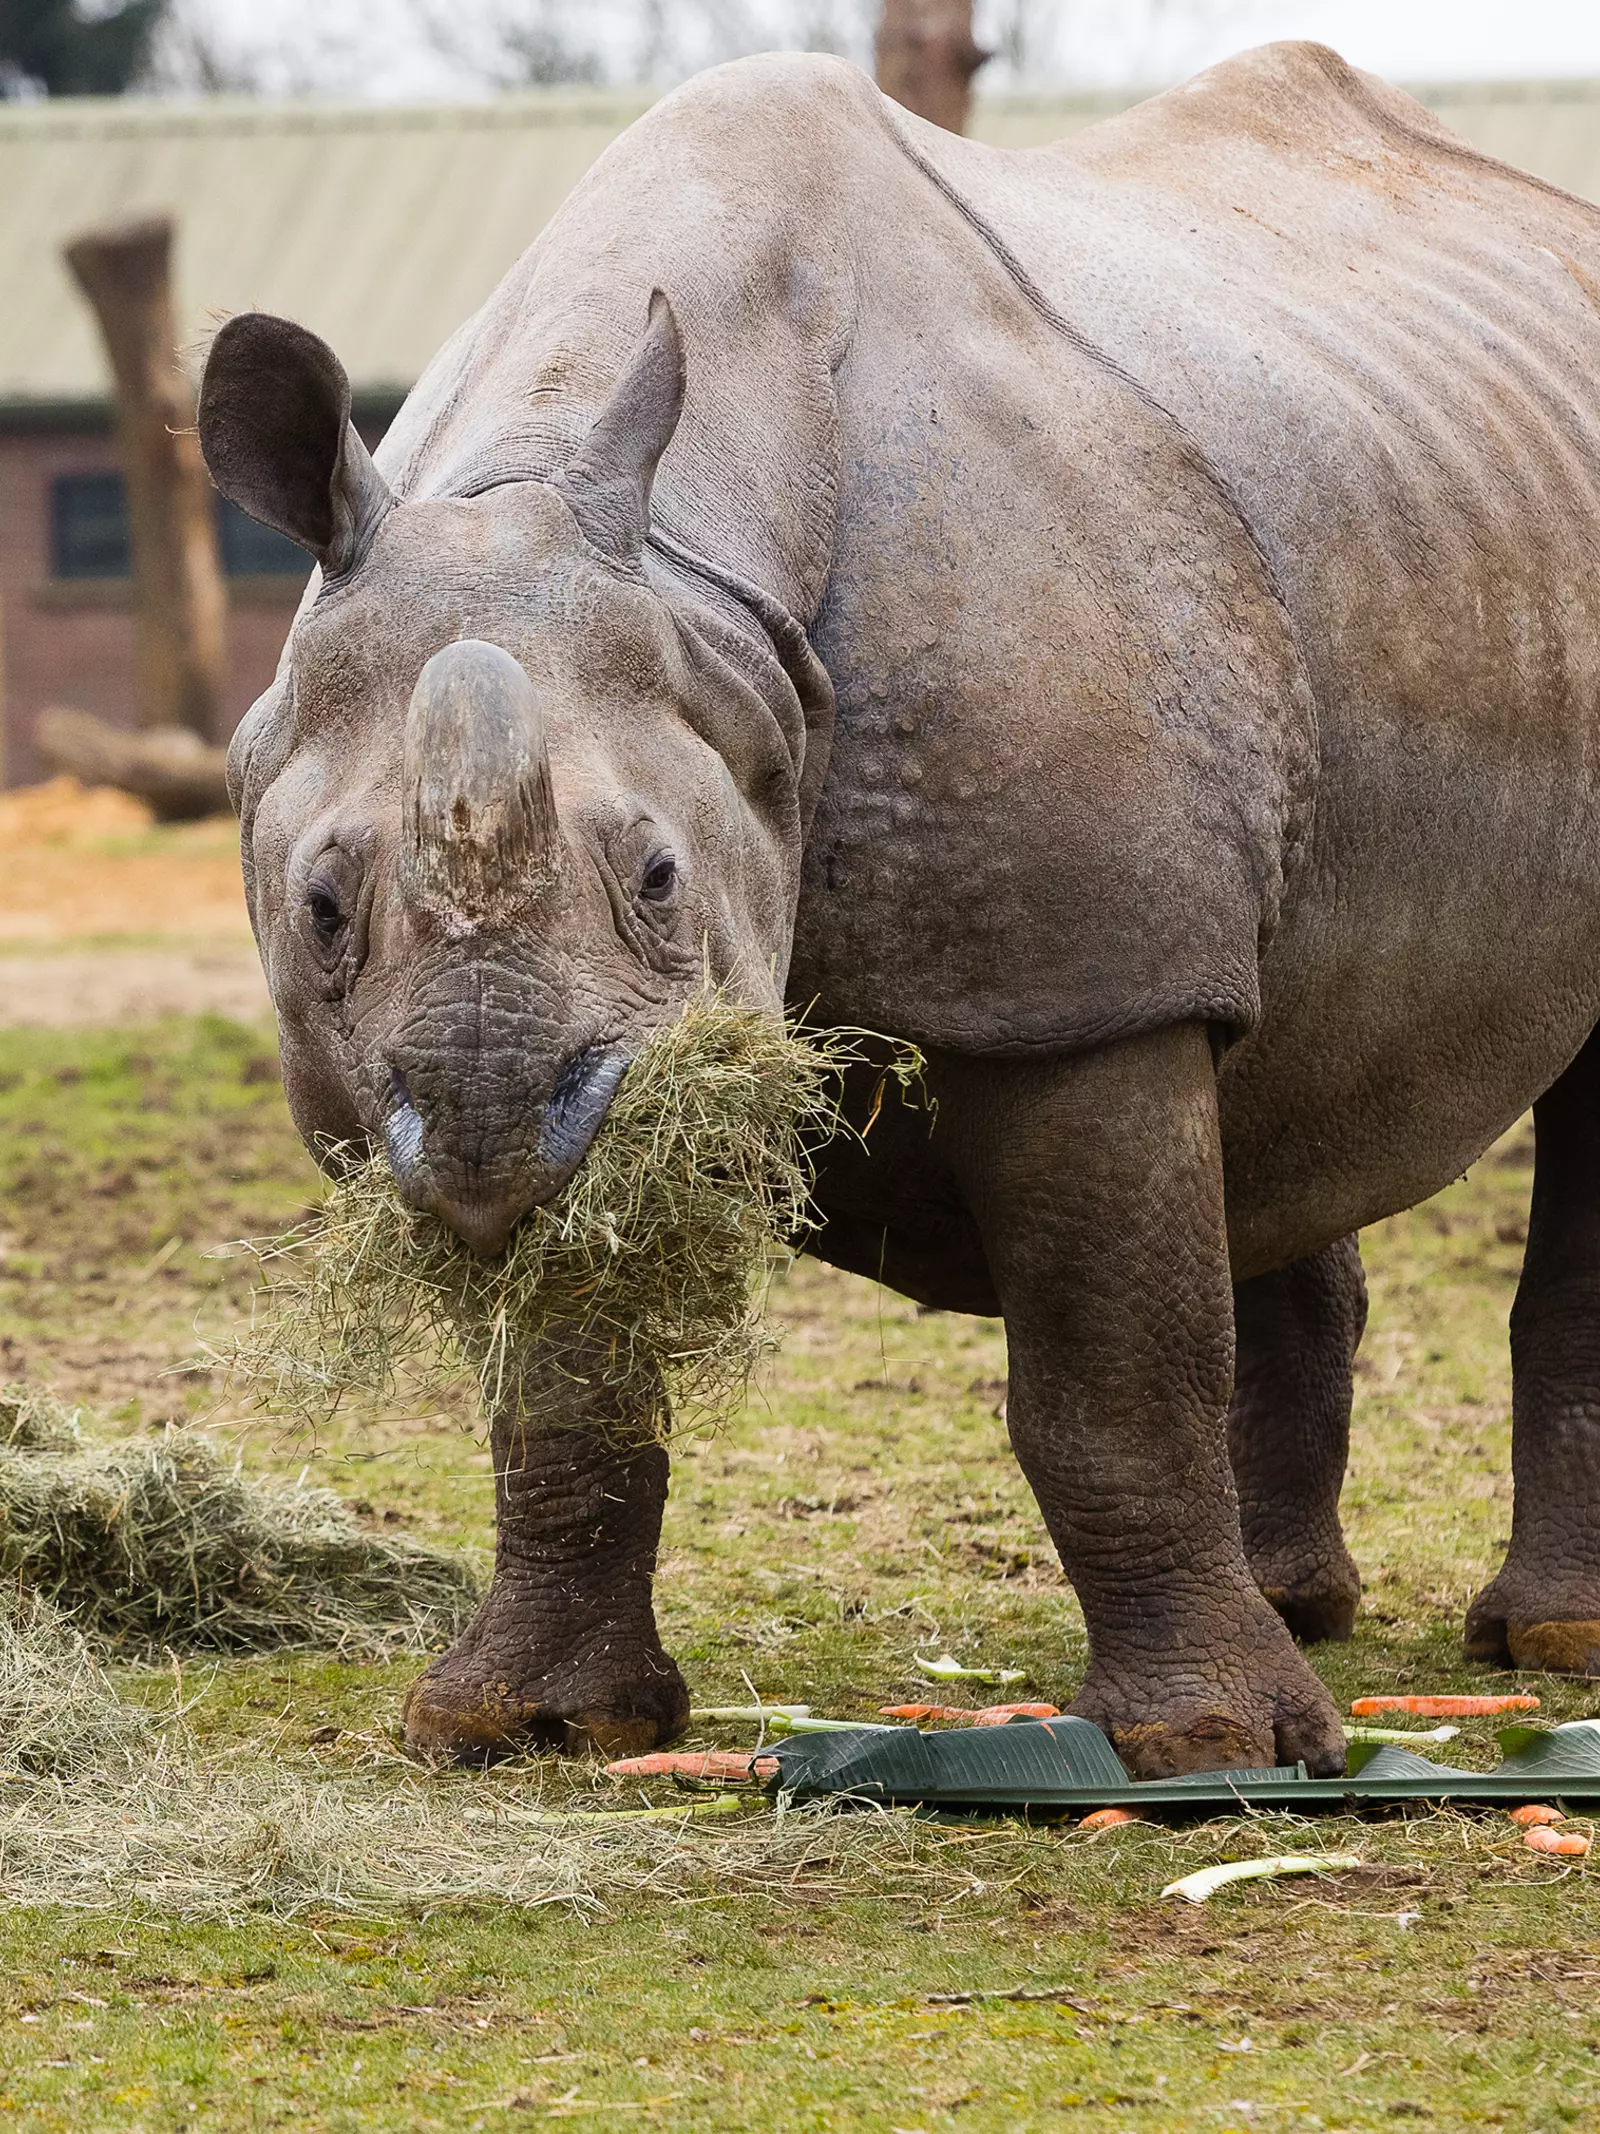 Greater one-horned rhino Behan eating hay at Whipsnade Zoo